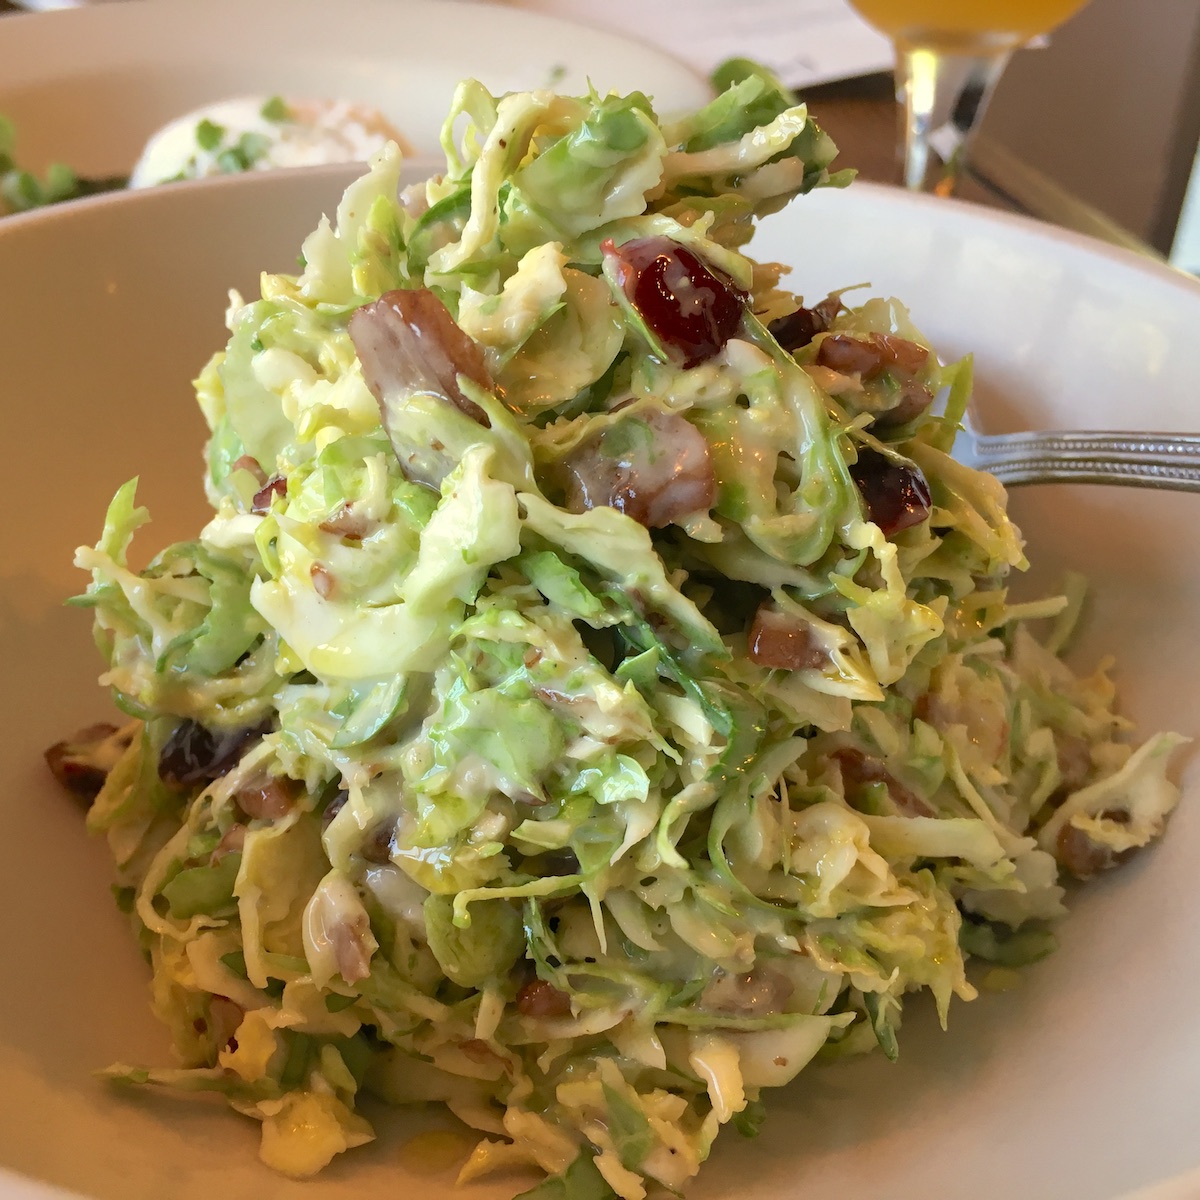 Shaved Brussel Sprouts from PROOF in Wynwood, Florida